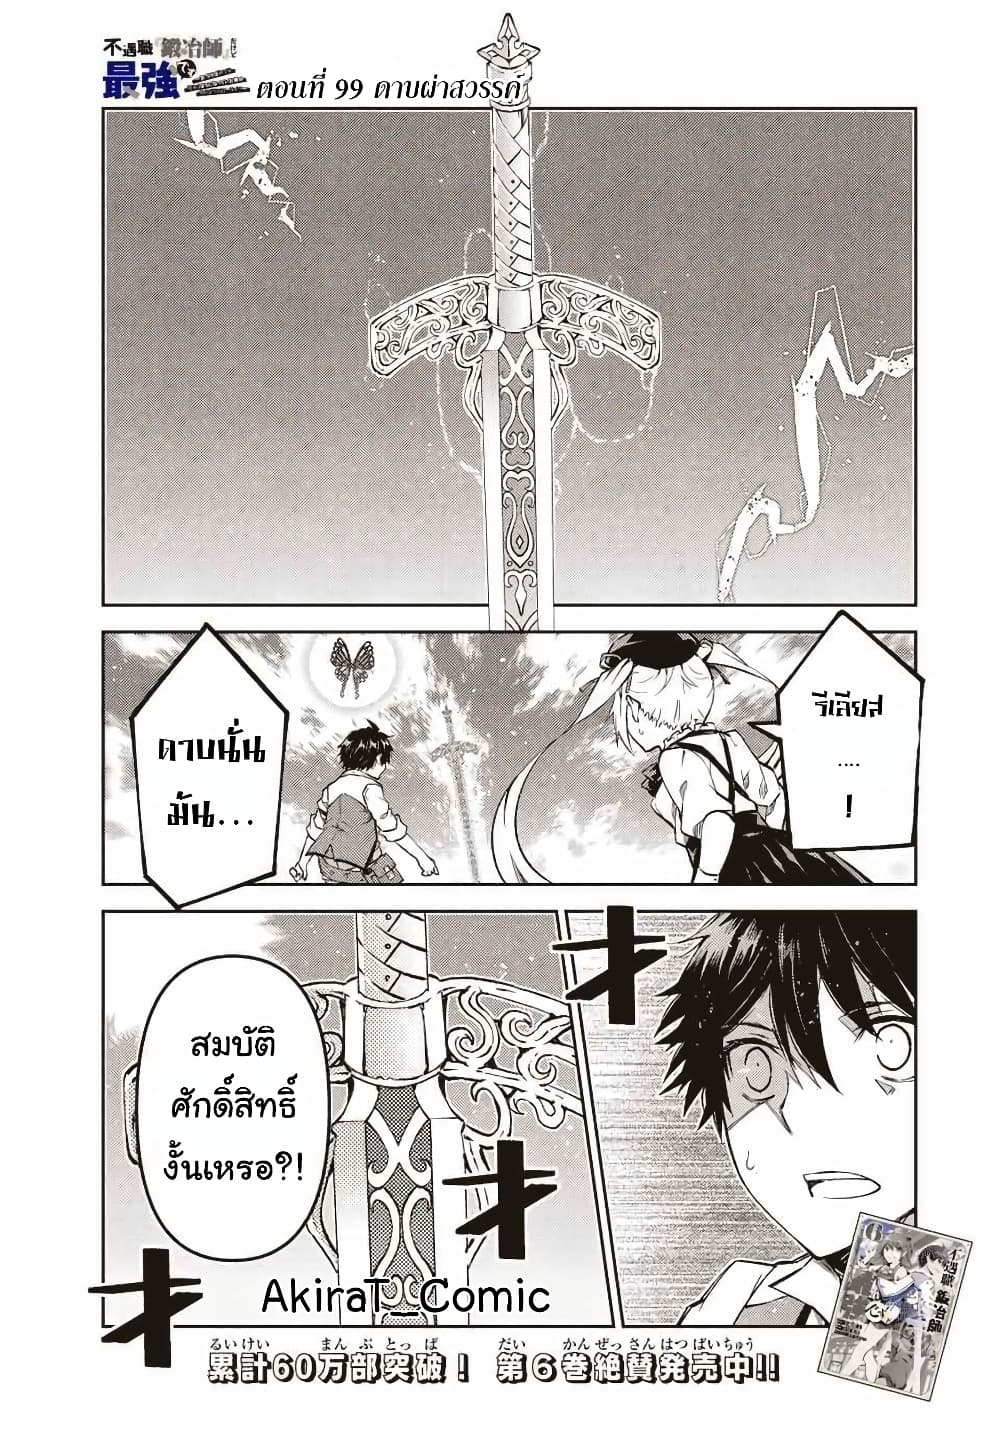 The Weakest Occupation "Blacksmith", but It's Actually the Strongest ช่างตีเหล็กอาชีพกระจอก? 99-99